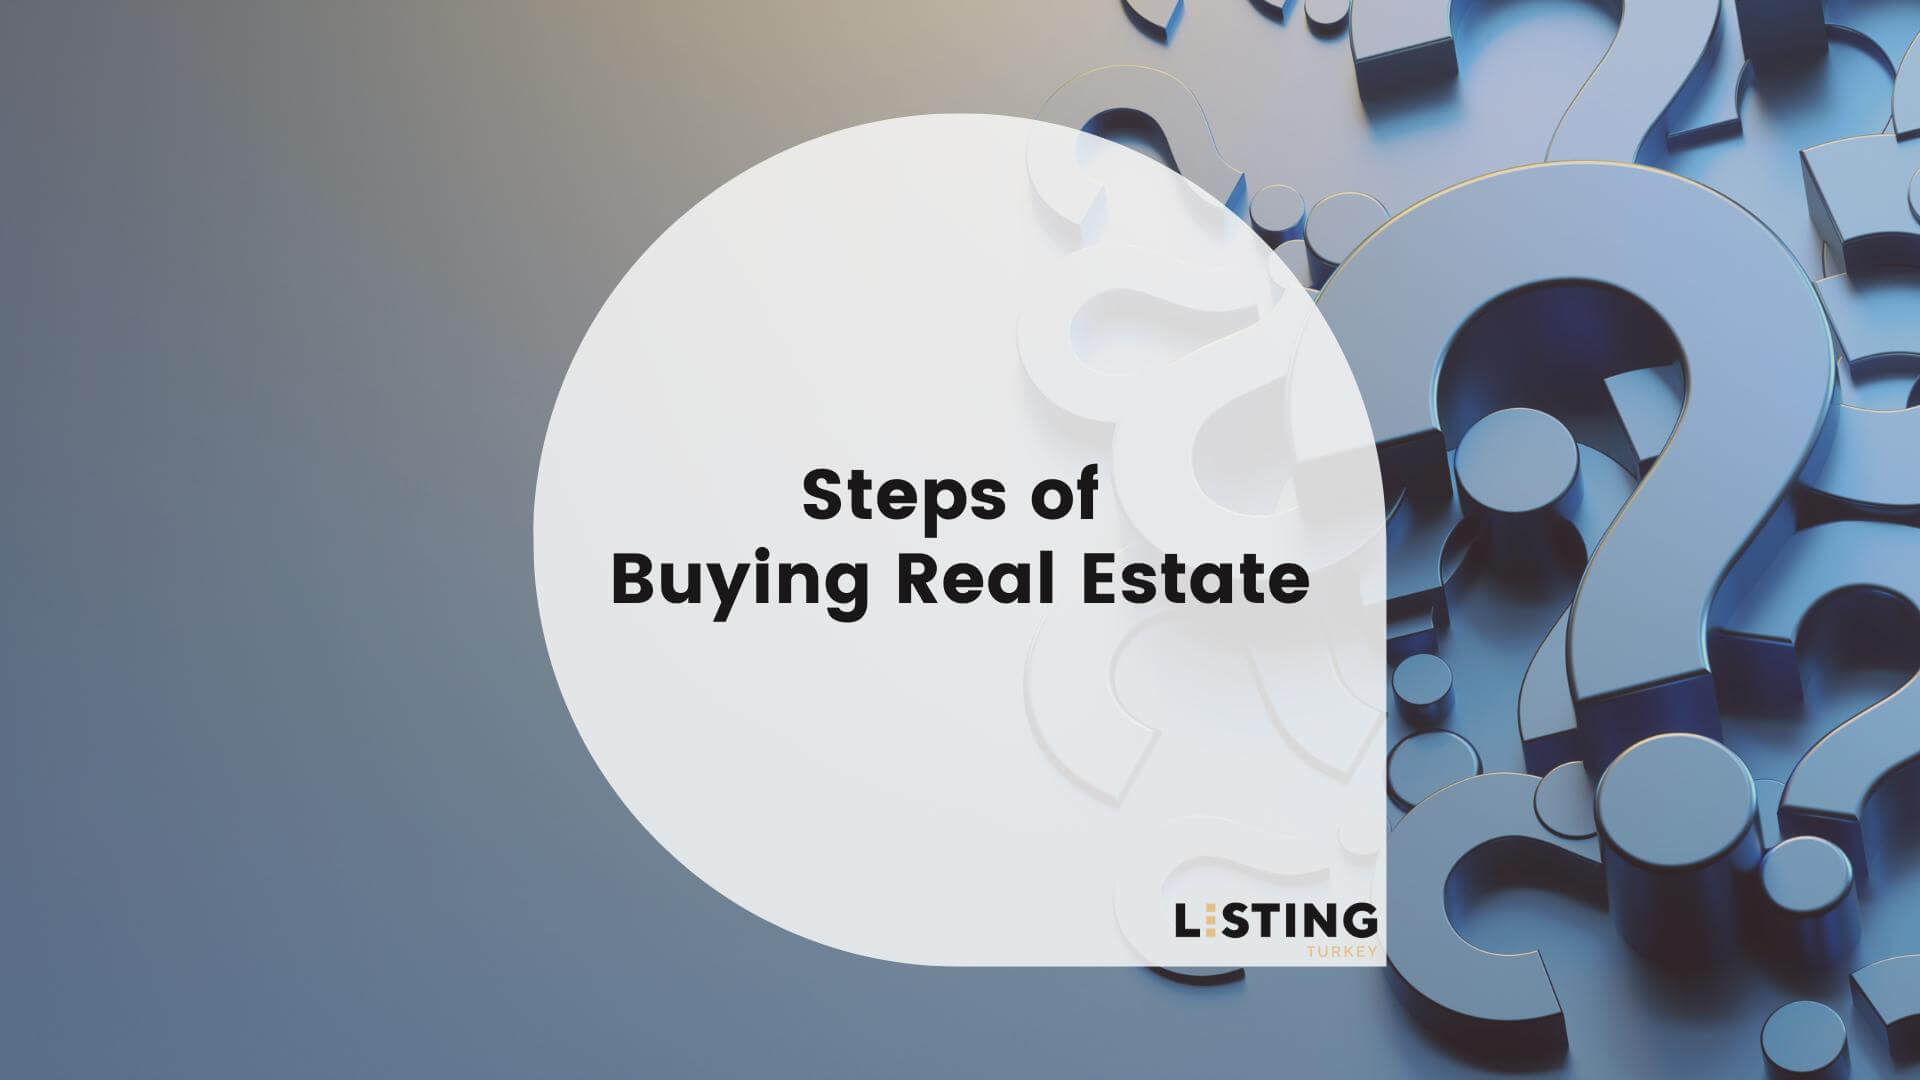 Steps of Buying Real Estate